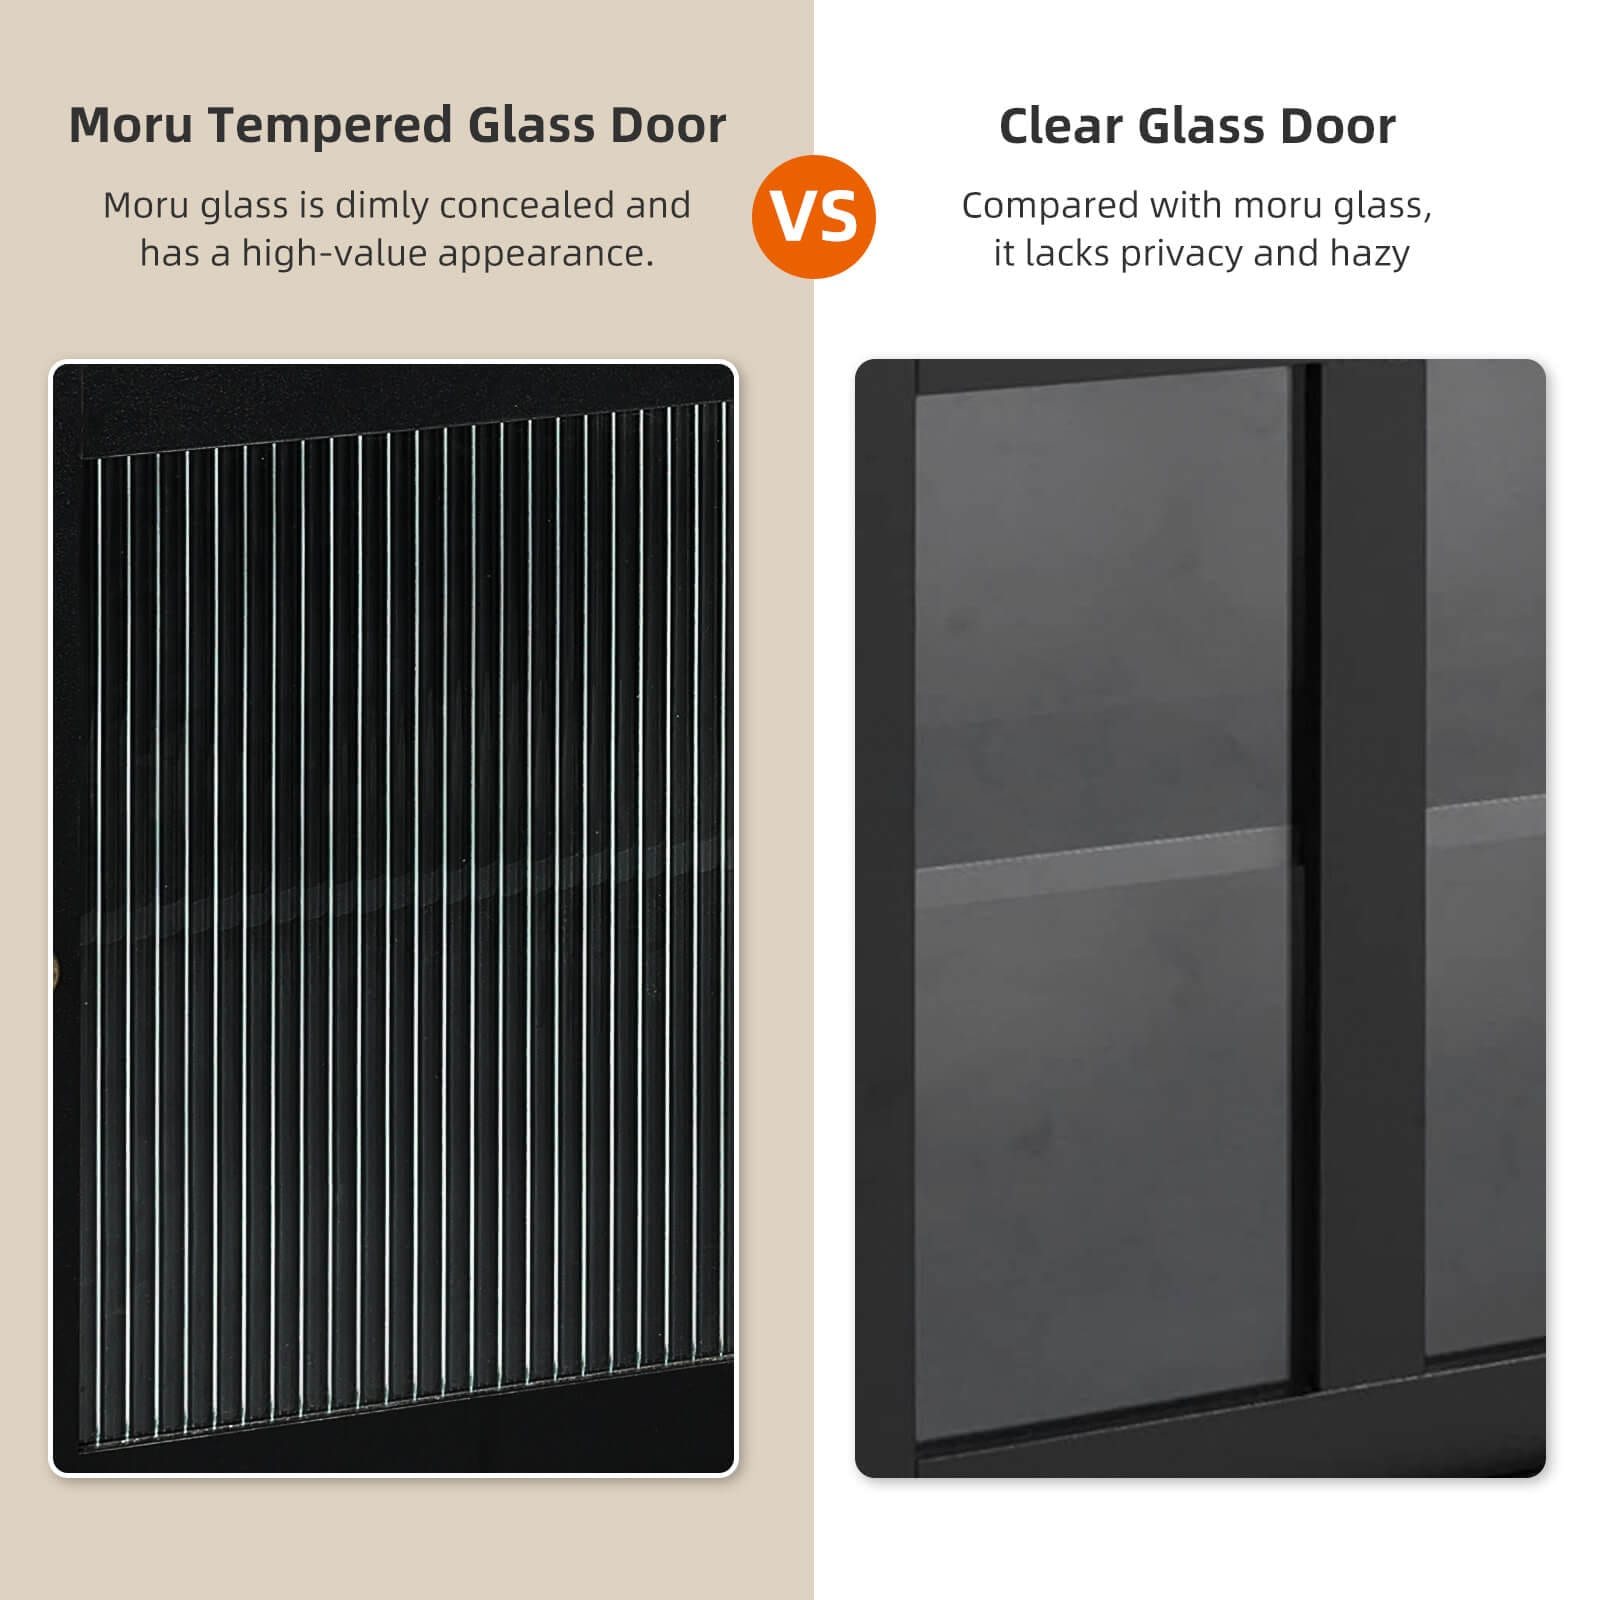 Elecwish Buffet Cabinet with Storage KA001 Moru tempered glass door VS with clear glass door